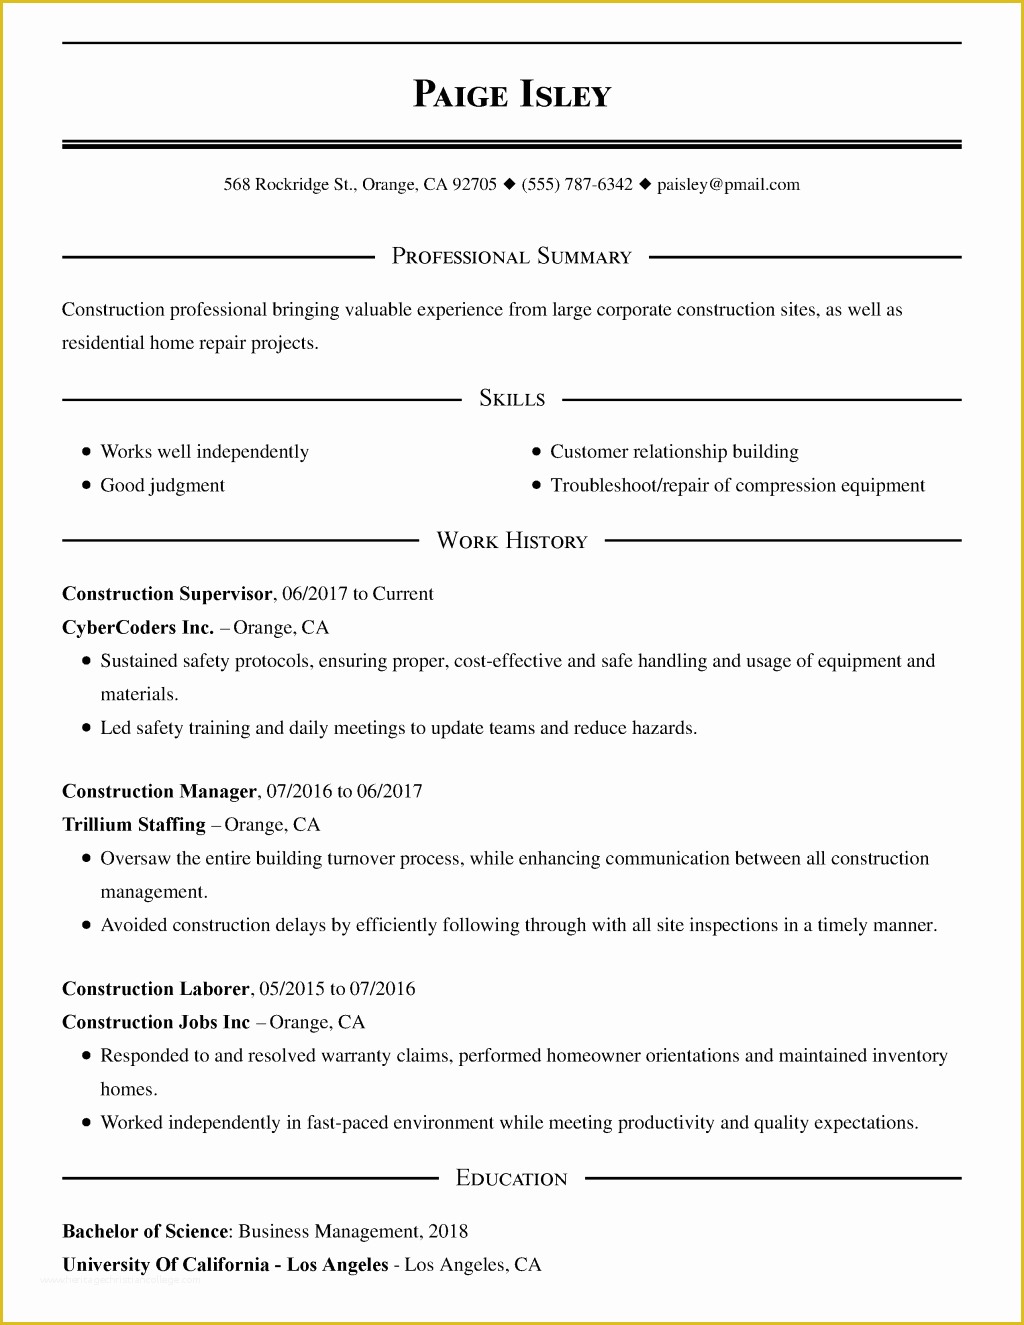 Professional Resume Template Free Download Of Best Professional Resume Templates 2018 Tag 53 Fantastic